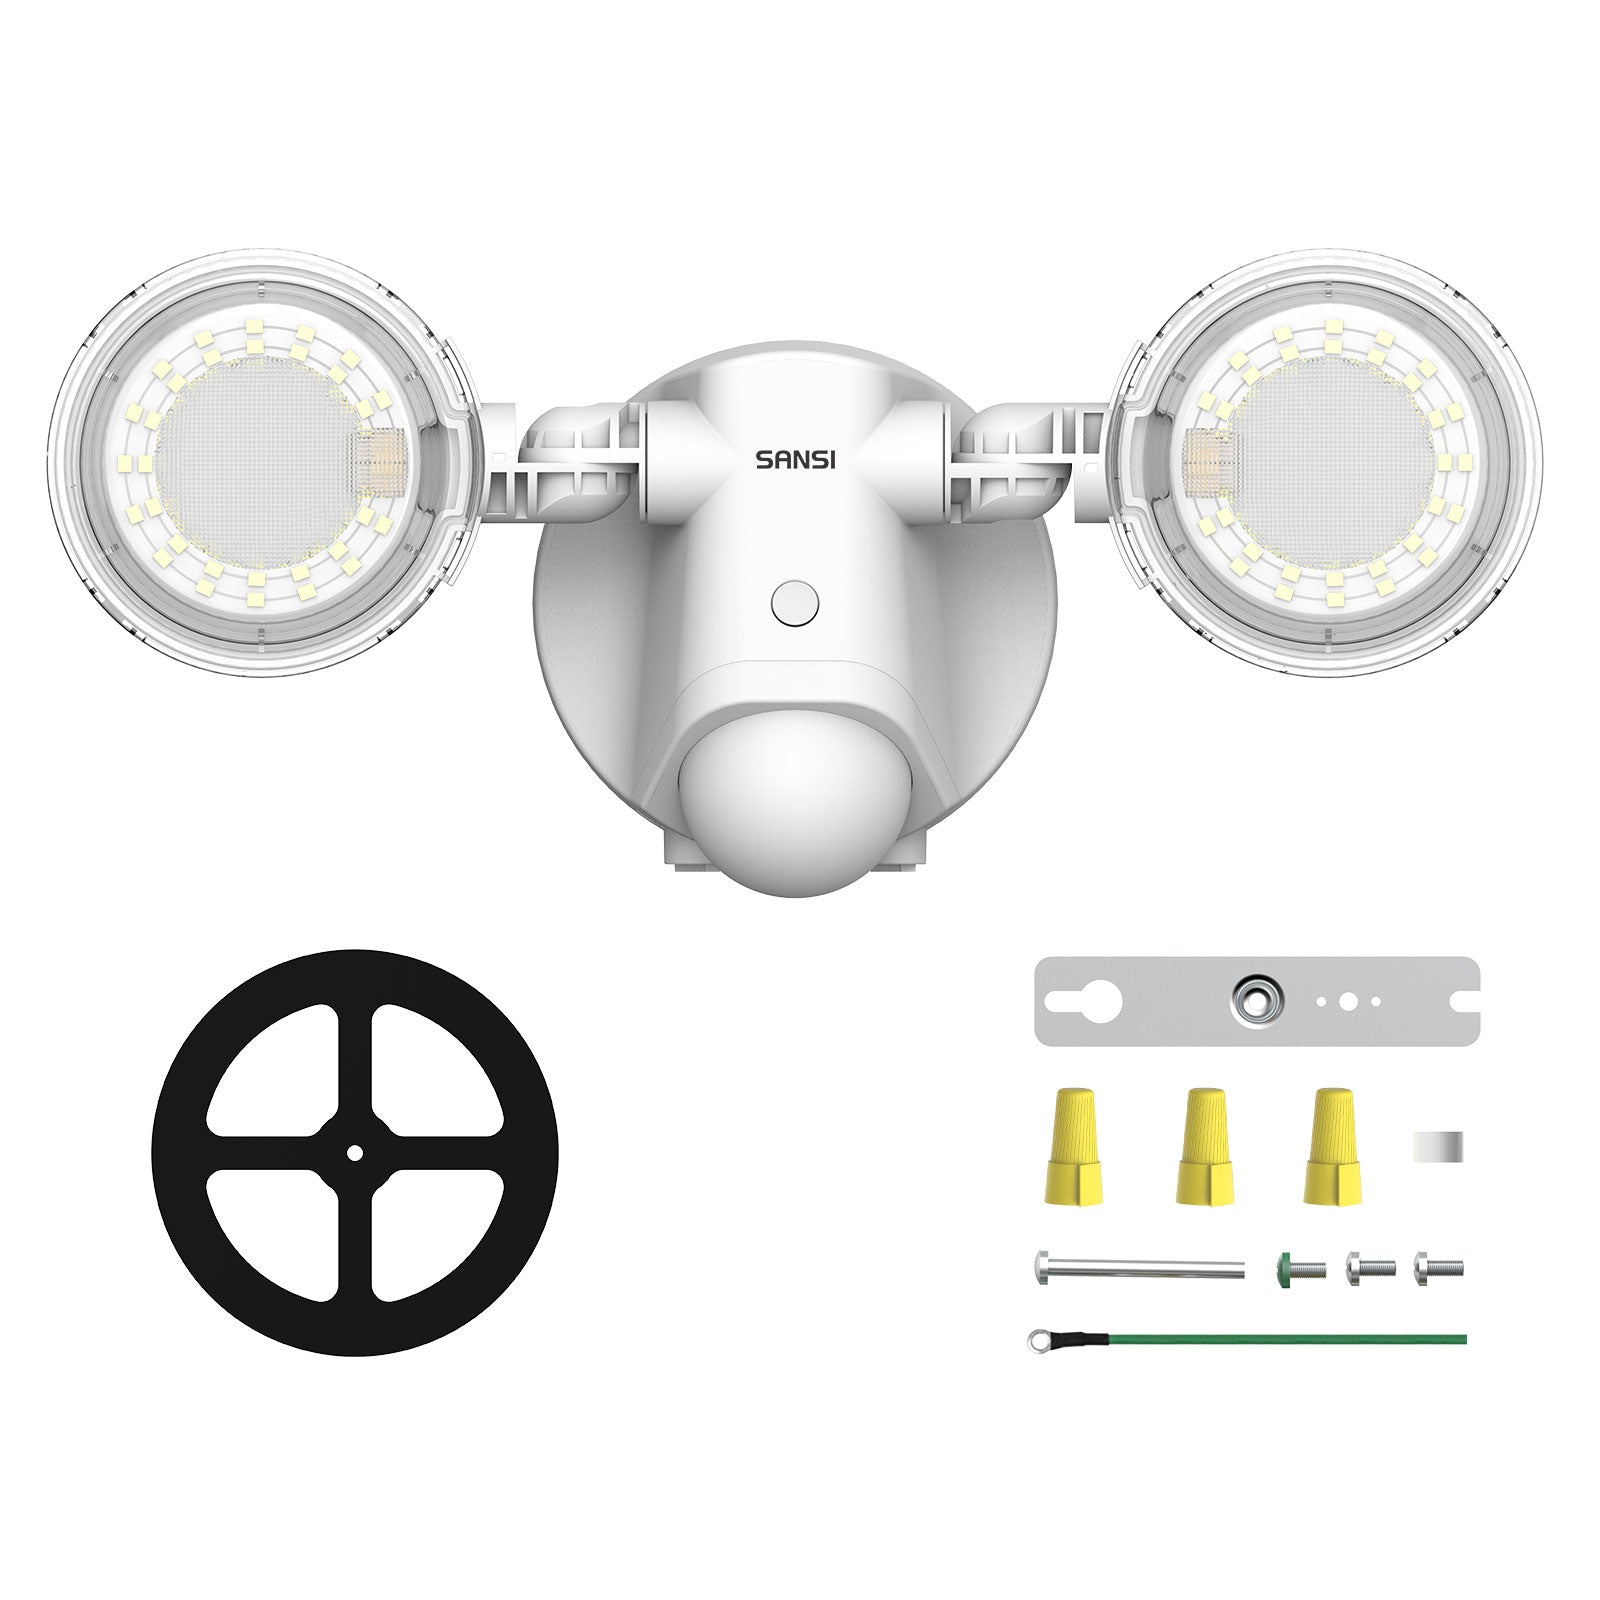 Upgraded 30W LED Security Light with the function of Motion Sensor